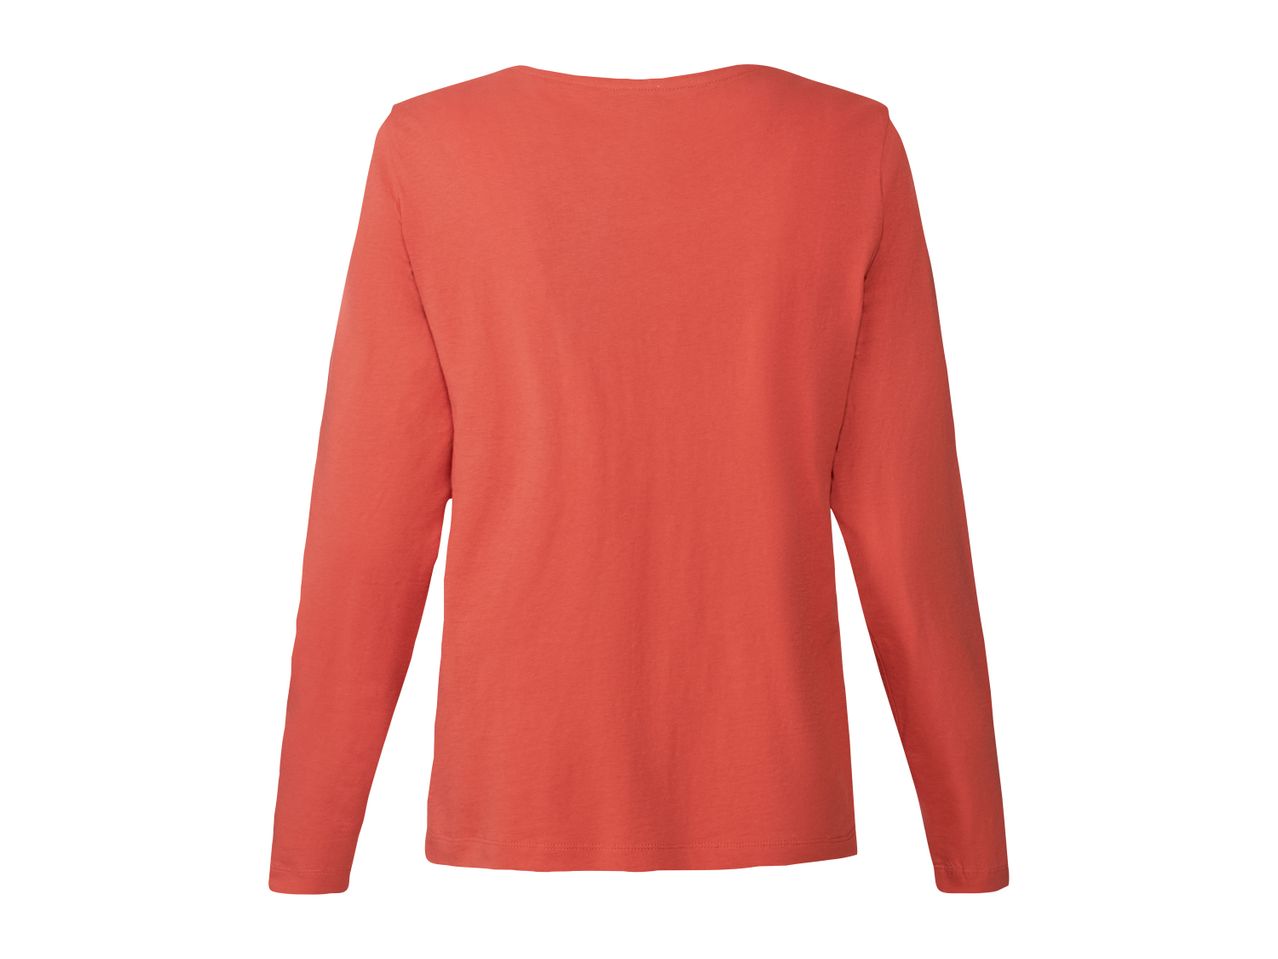 Go to full screen view: Ladies’ Long Sleeve Top - Image 6